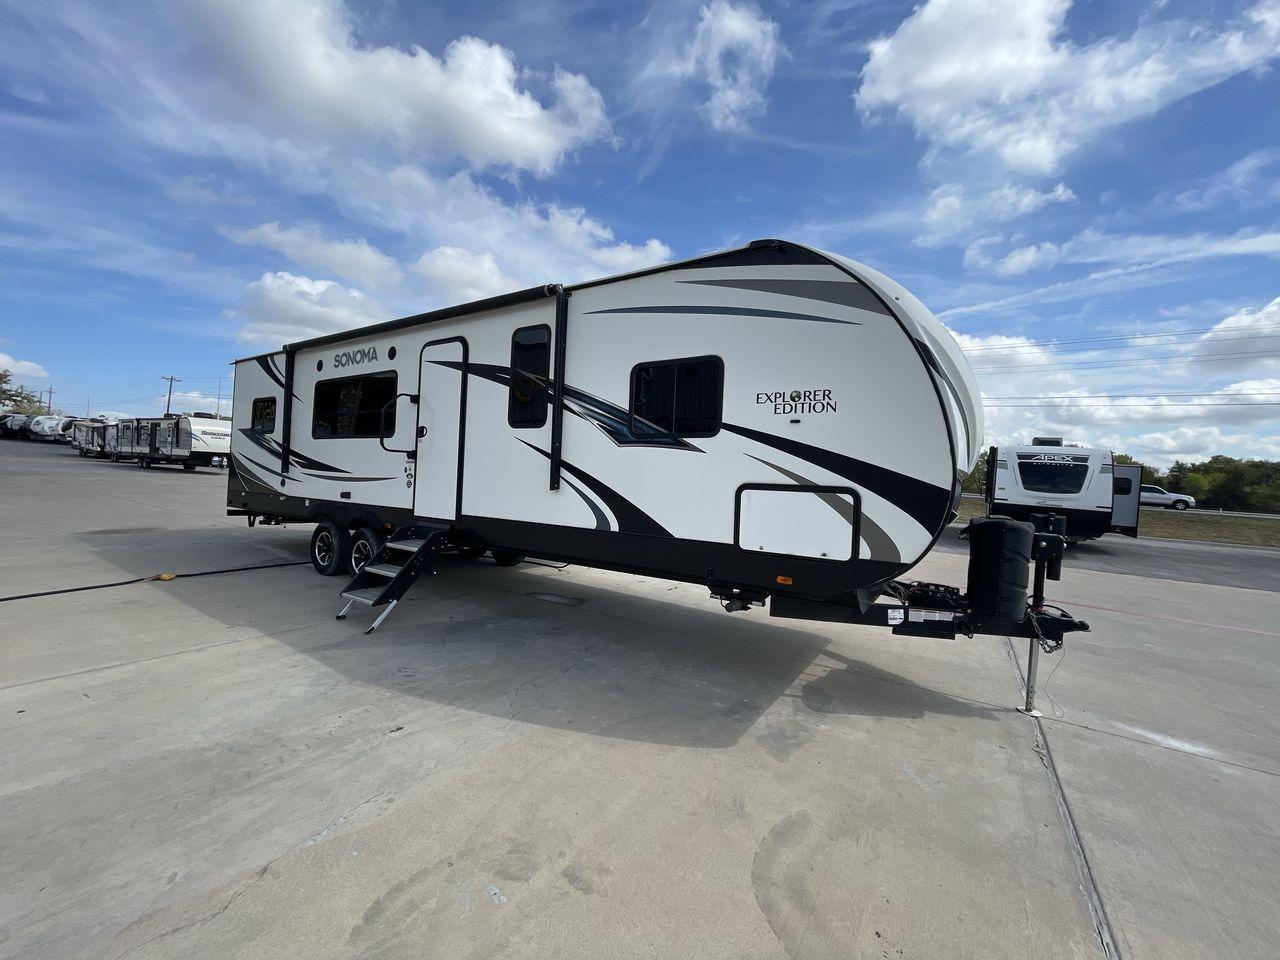 2020 FOREST RIVER SONOMA 2903RK (4X4TSKE28LE) , Length: 34.75 ft. | Dry Weight: 7,799 lbs. | Gross Weight: 9,999 lbs. | Slides: 1 transmission, located at 4319 N Main Street, Cleburne, TX, 76033, (817) 221-0660, 32.435829, -97.384178 - Experience extraordinary adventures with the 2020 Forest River Sonoma 2903RK. Measuring 34.75 feet long and weighing 7,799 pounds dry, this unit is both large and lightweight, making it easy to pull and handle. The Sonoma 2903RK provides adequate living space without sacrificing practicality with a - Photo #22